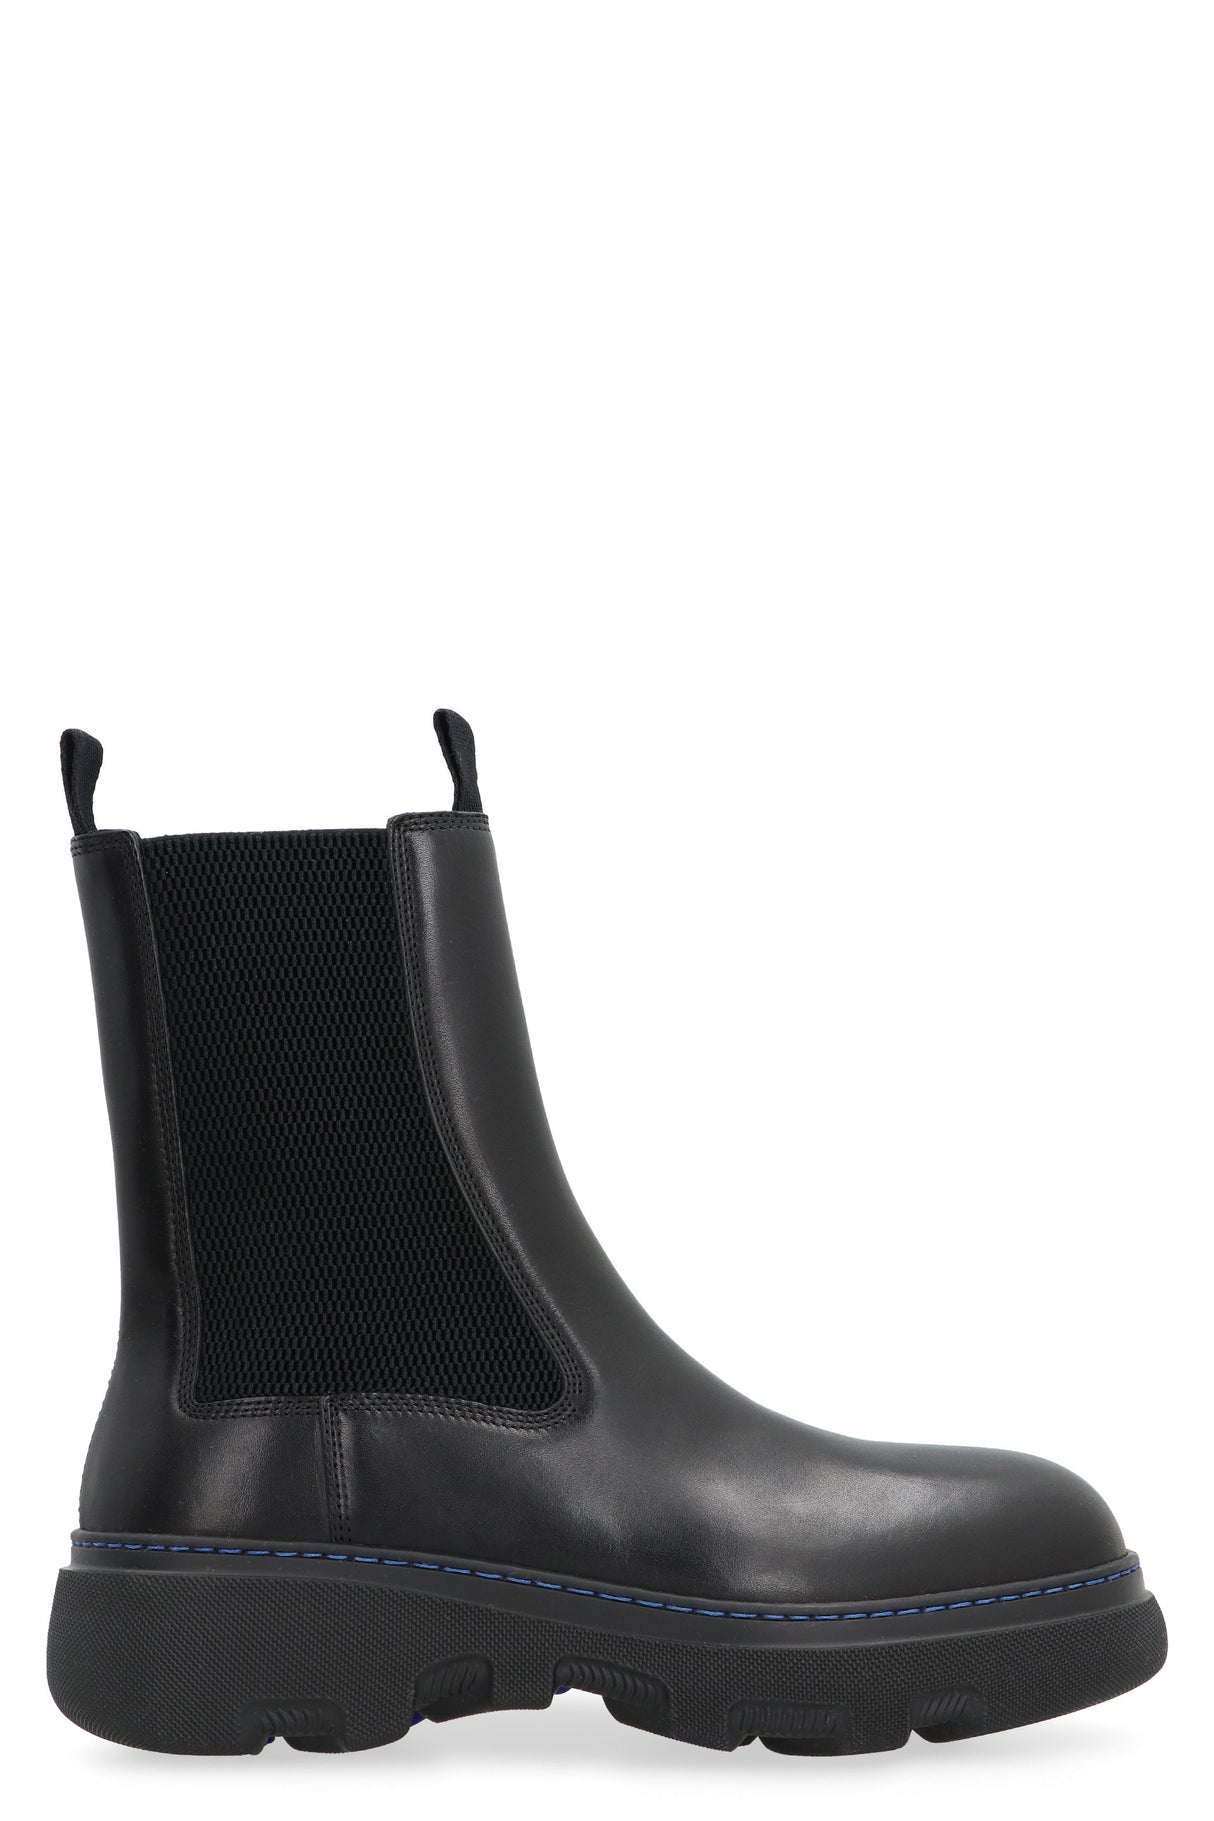 BURBERRY Leather Chelsea Boots for Women - Black